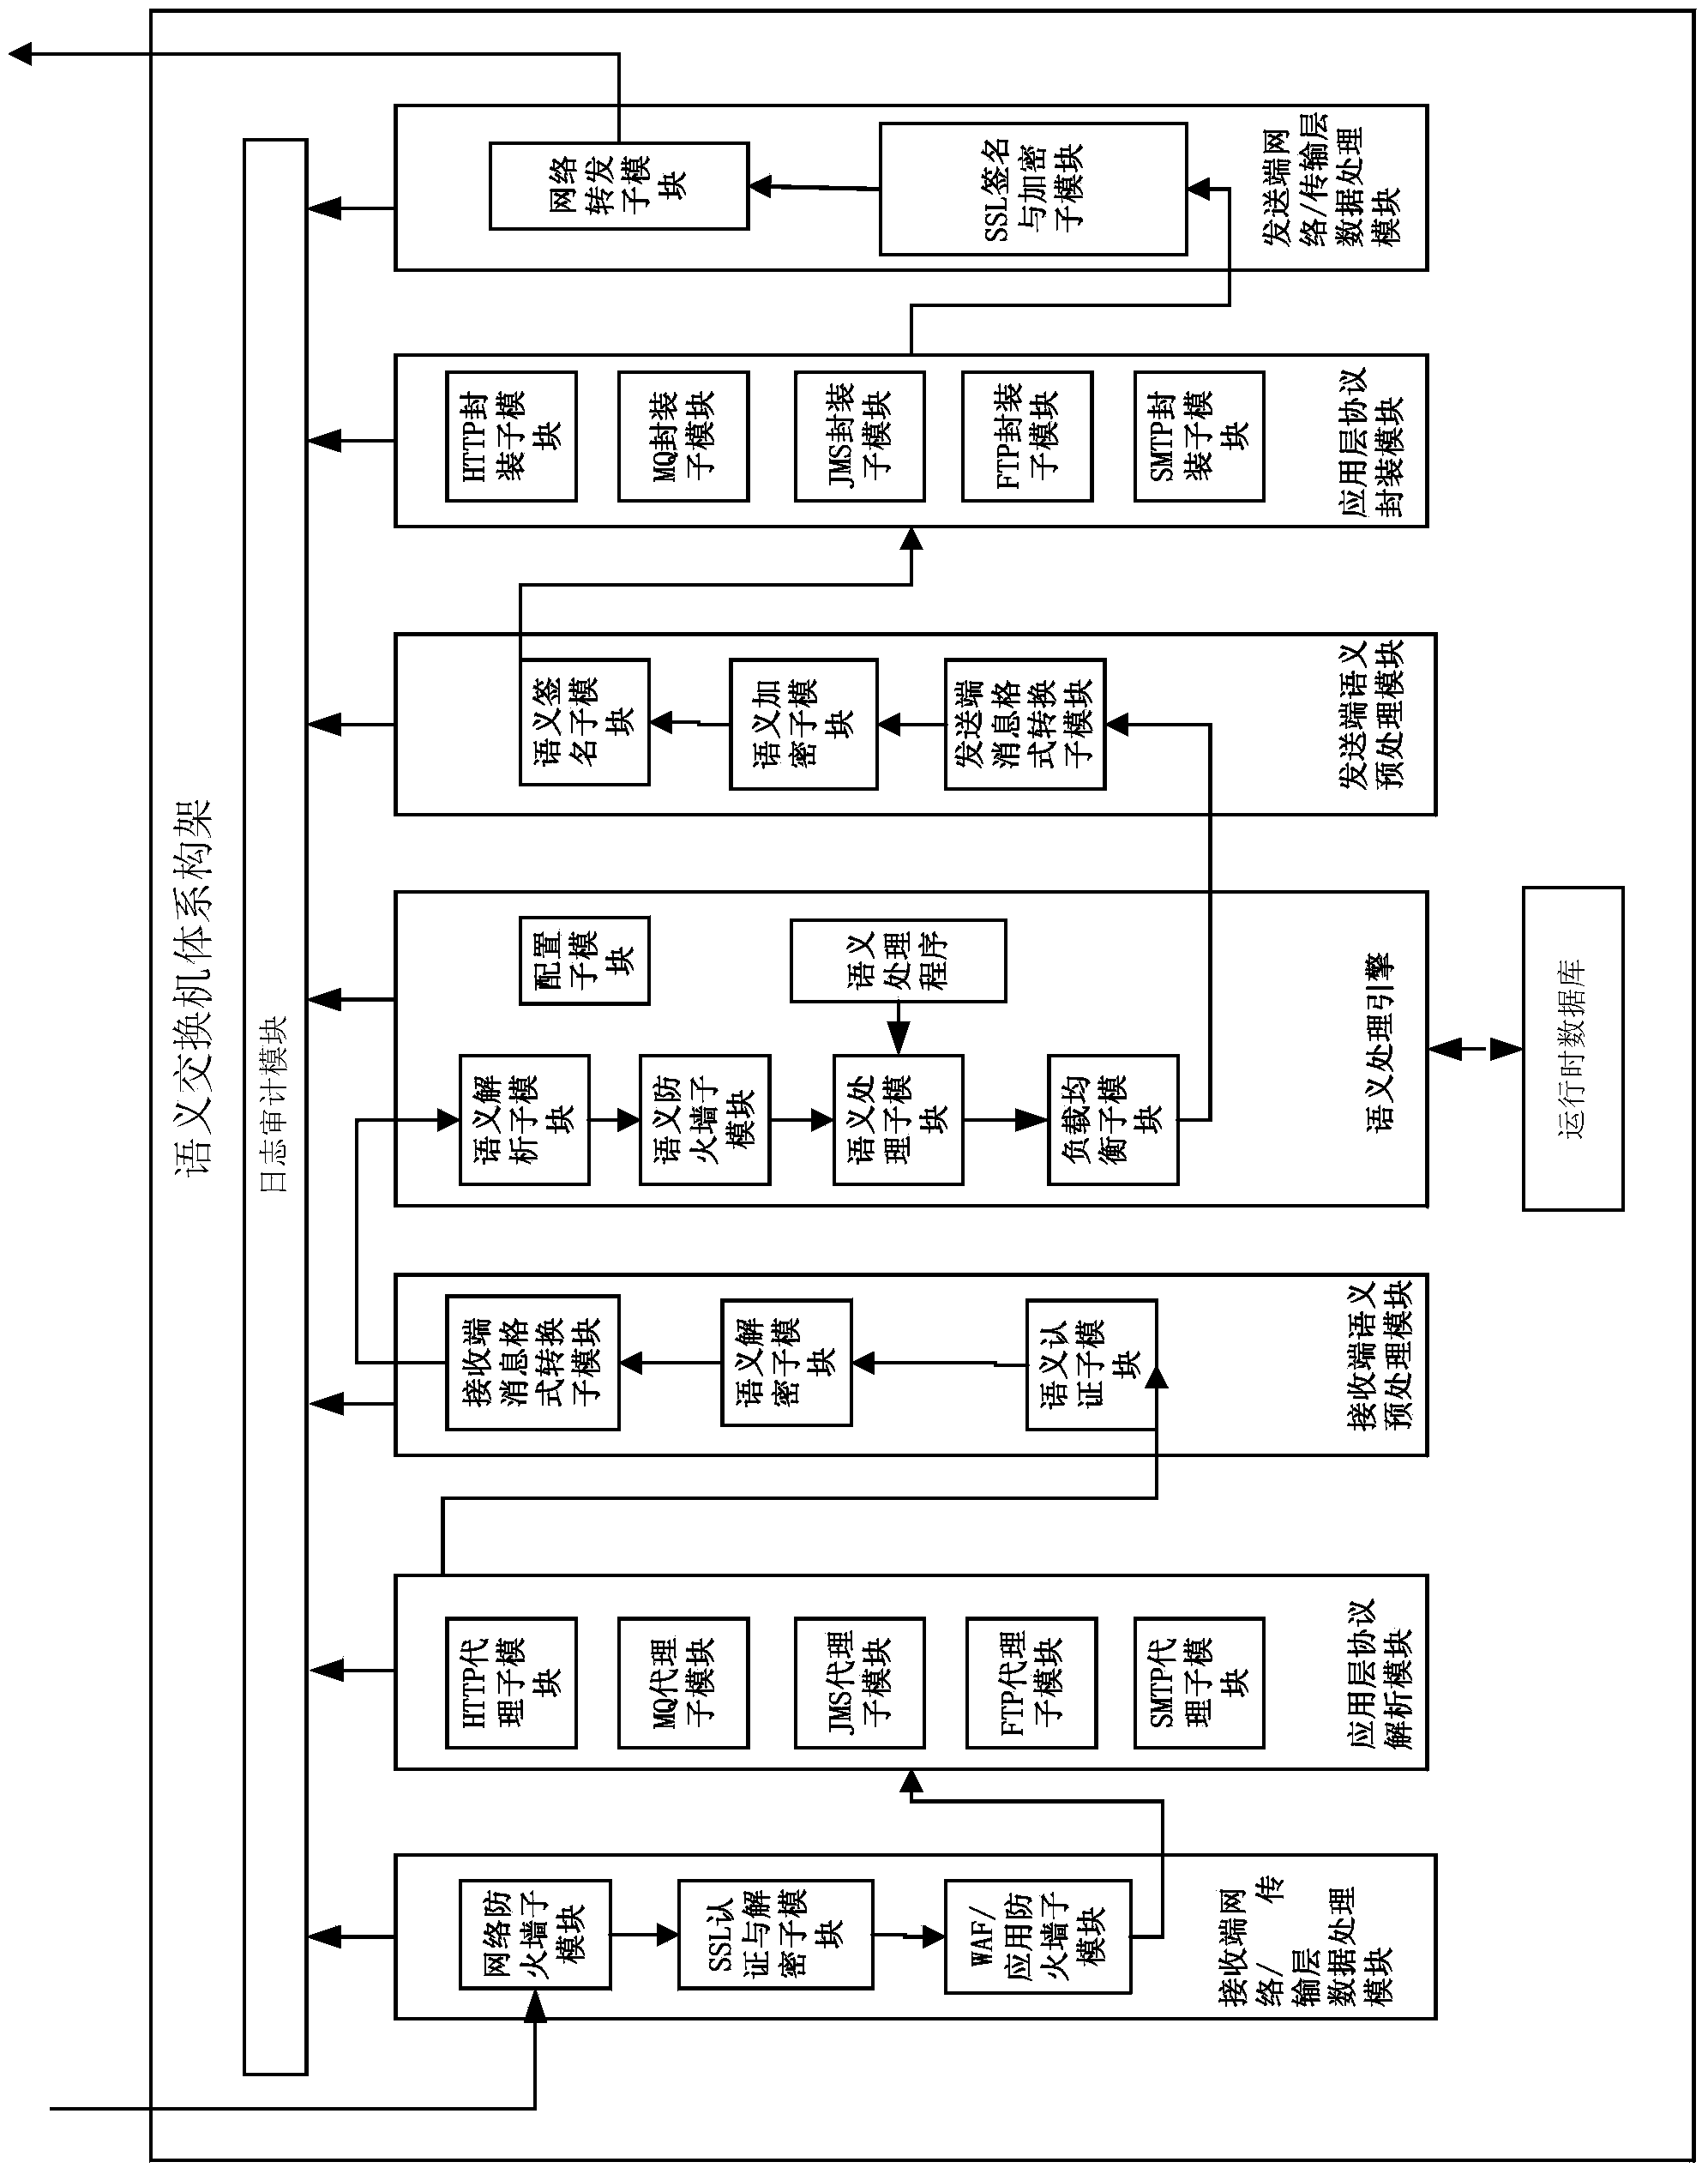 Method for semantic switch loose coupling system to process information